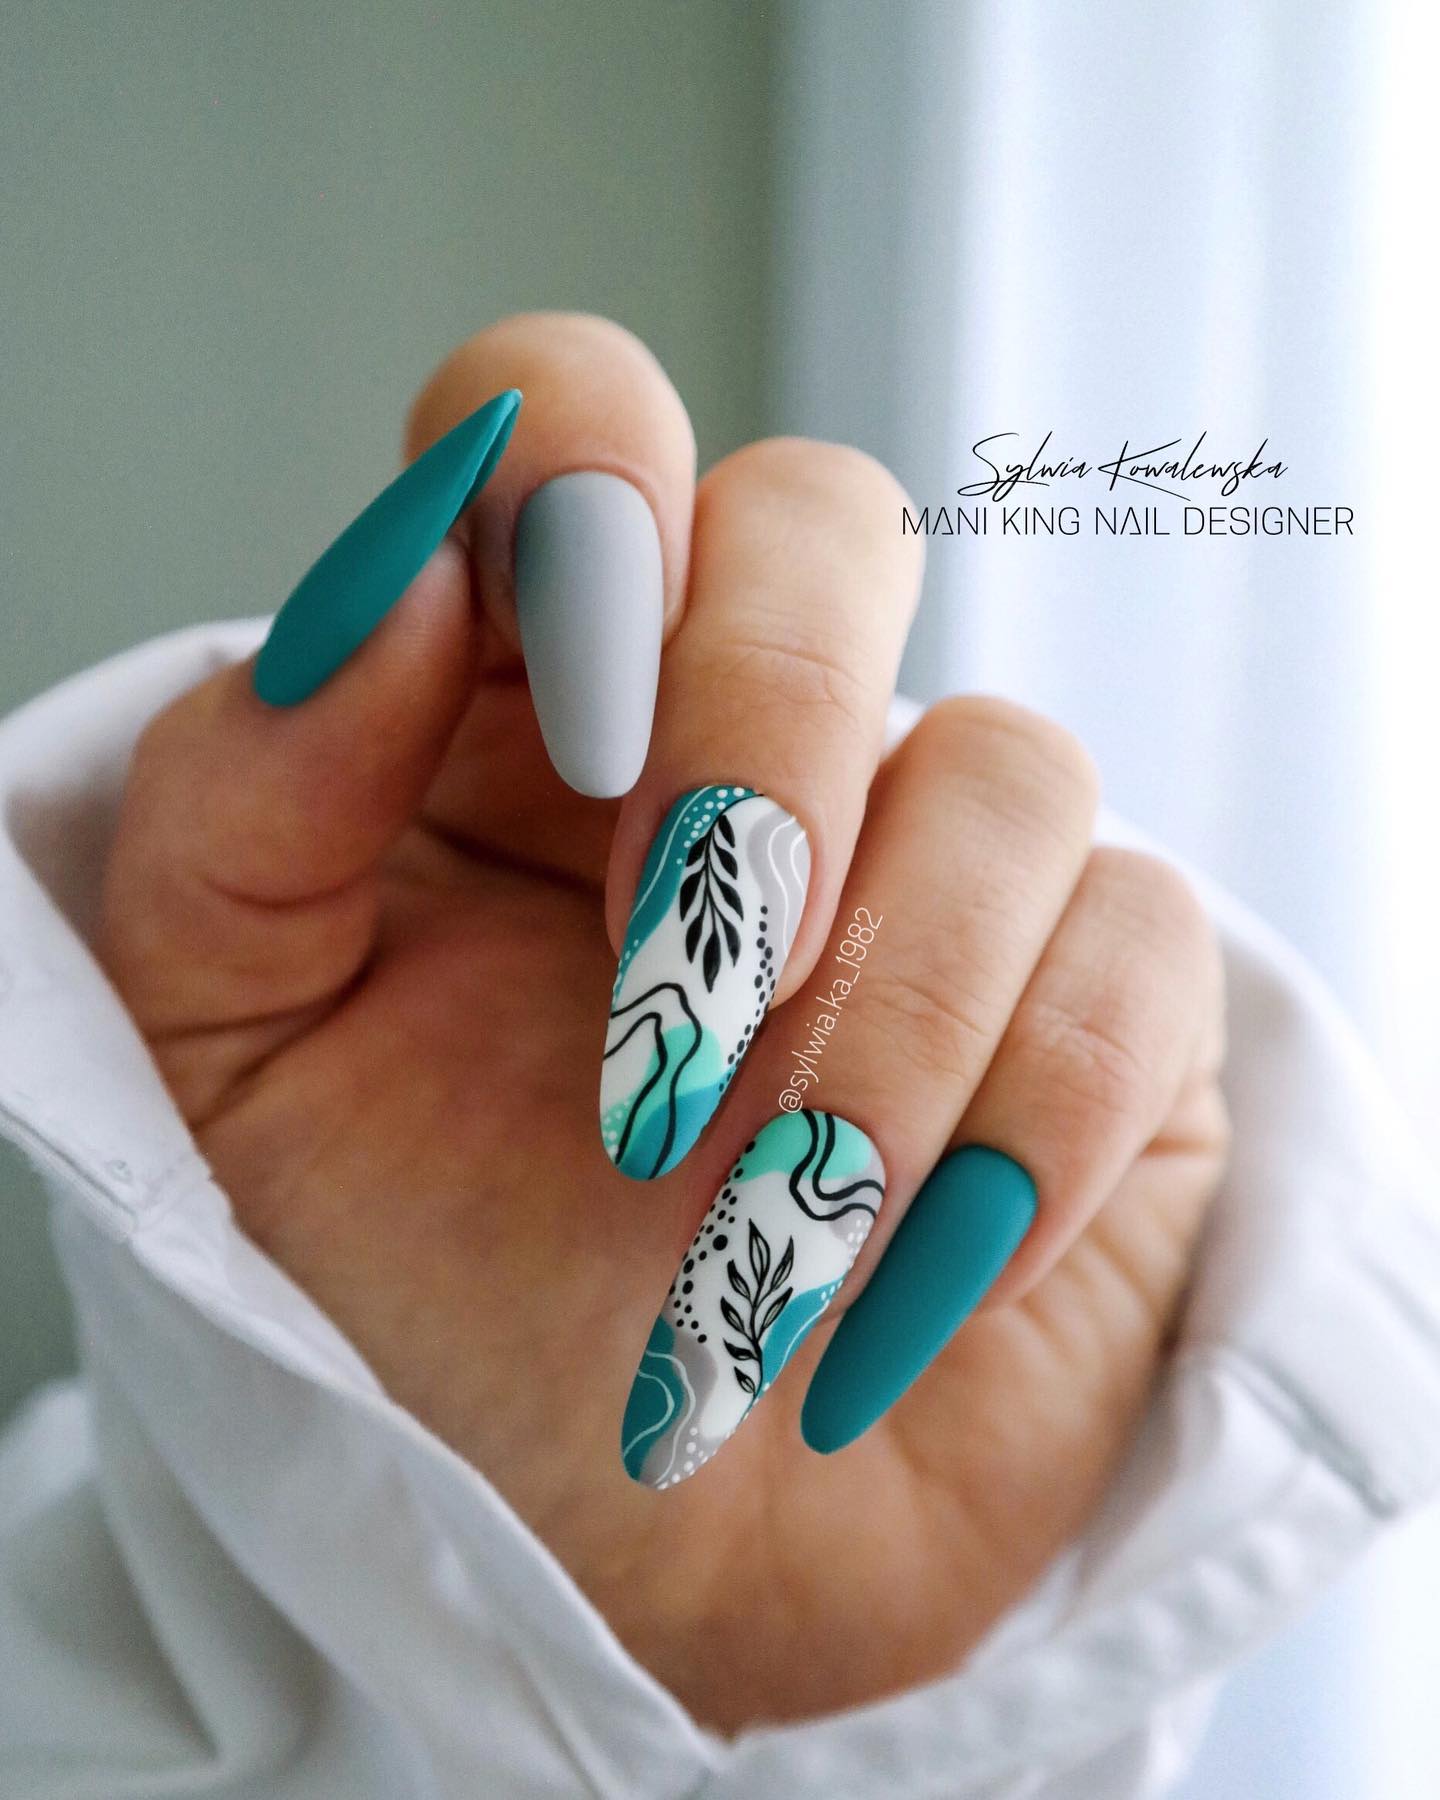 Leaf nail art rocks. It's a good way to go if you want something simple, but it's also easy to make this look more complex by adding a pattern or detailed leaf design like the one above. For your accent nails, use a white matte nail polish and add green color with some leaves.